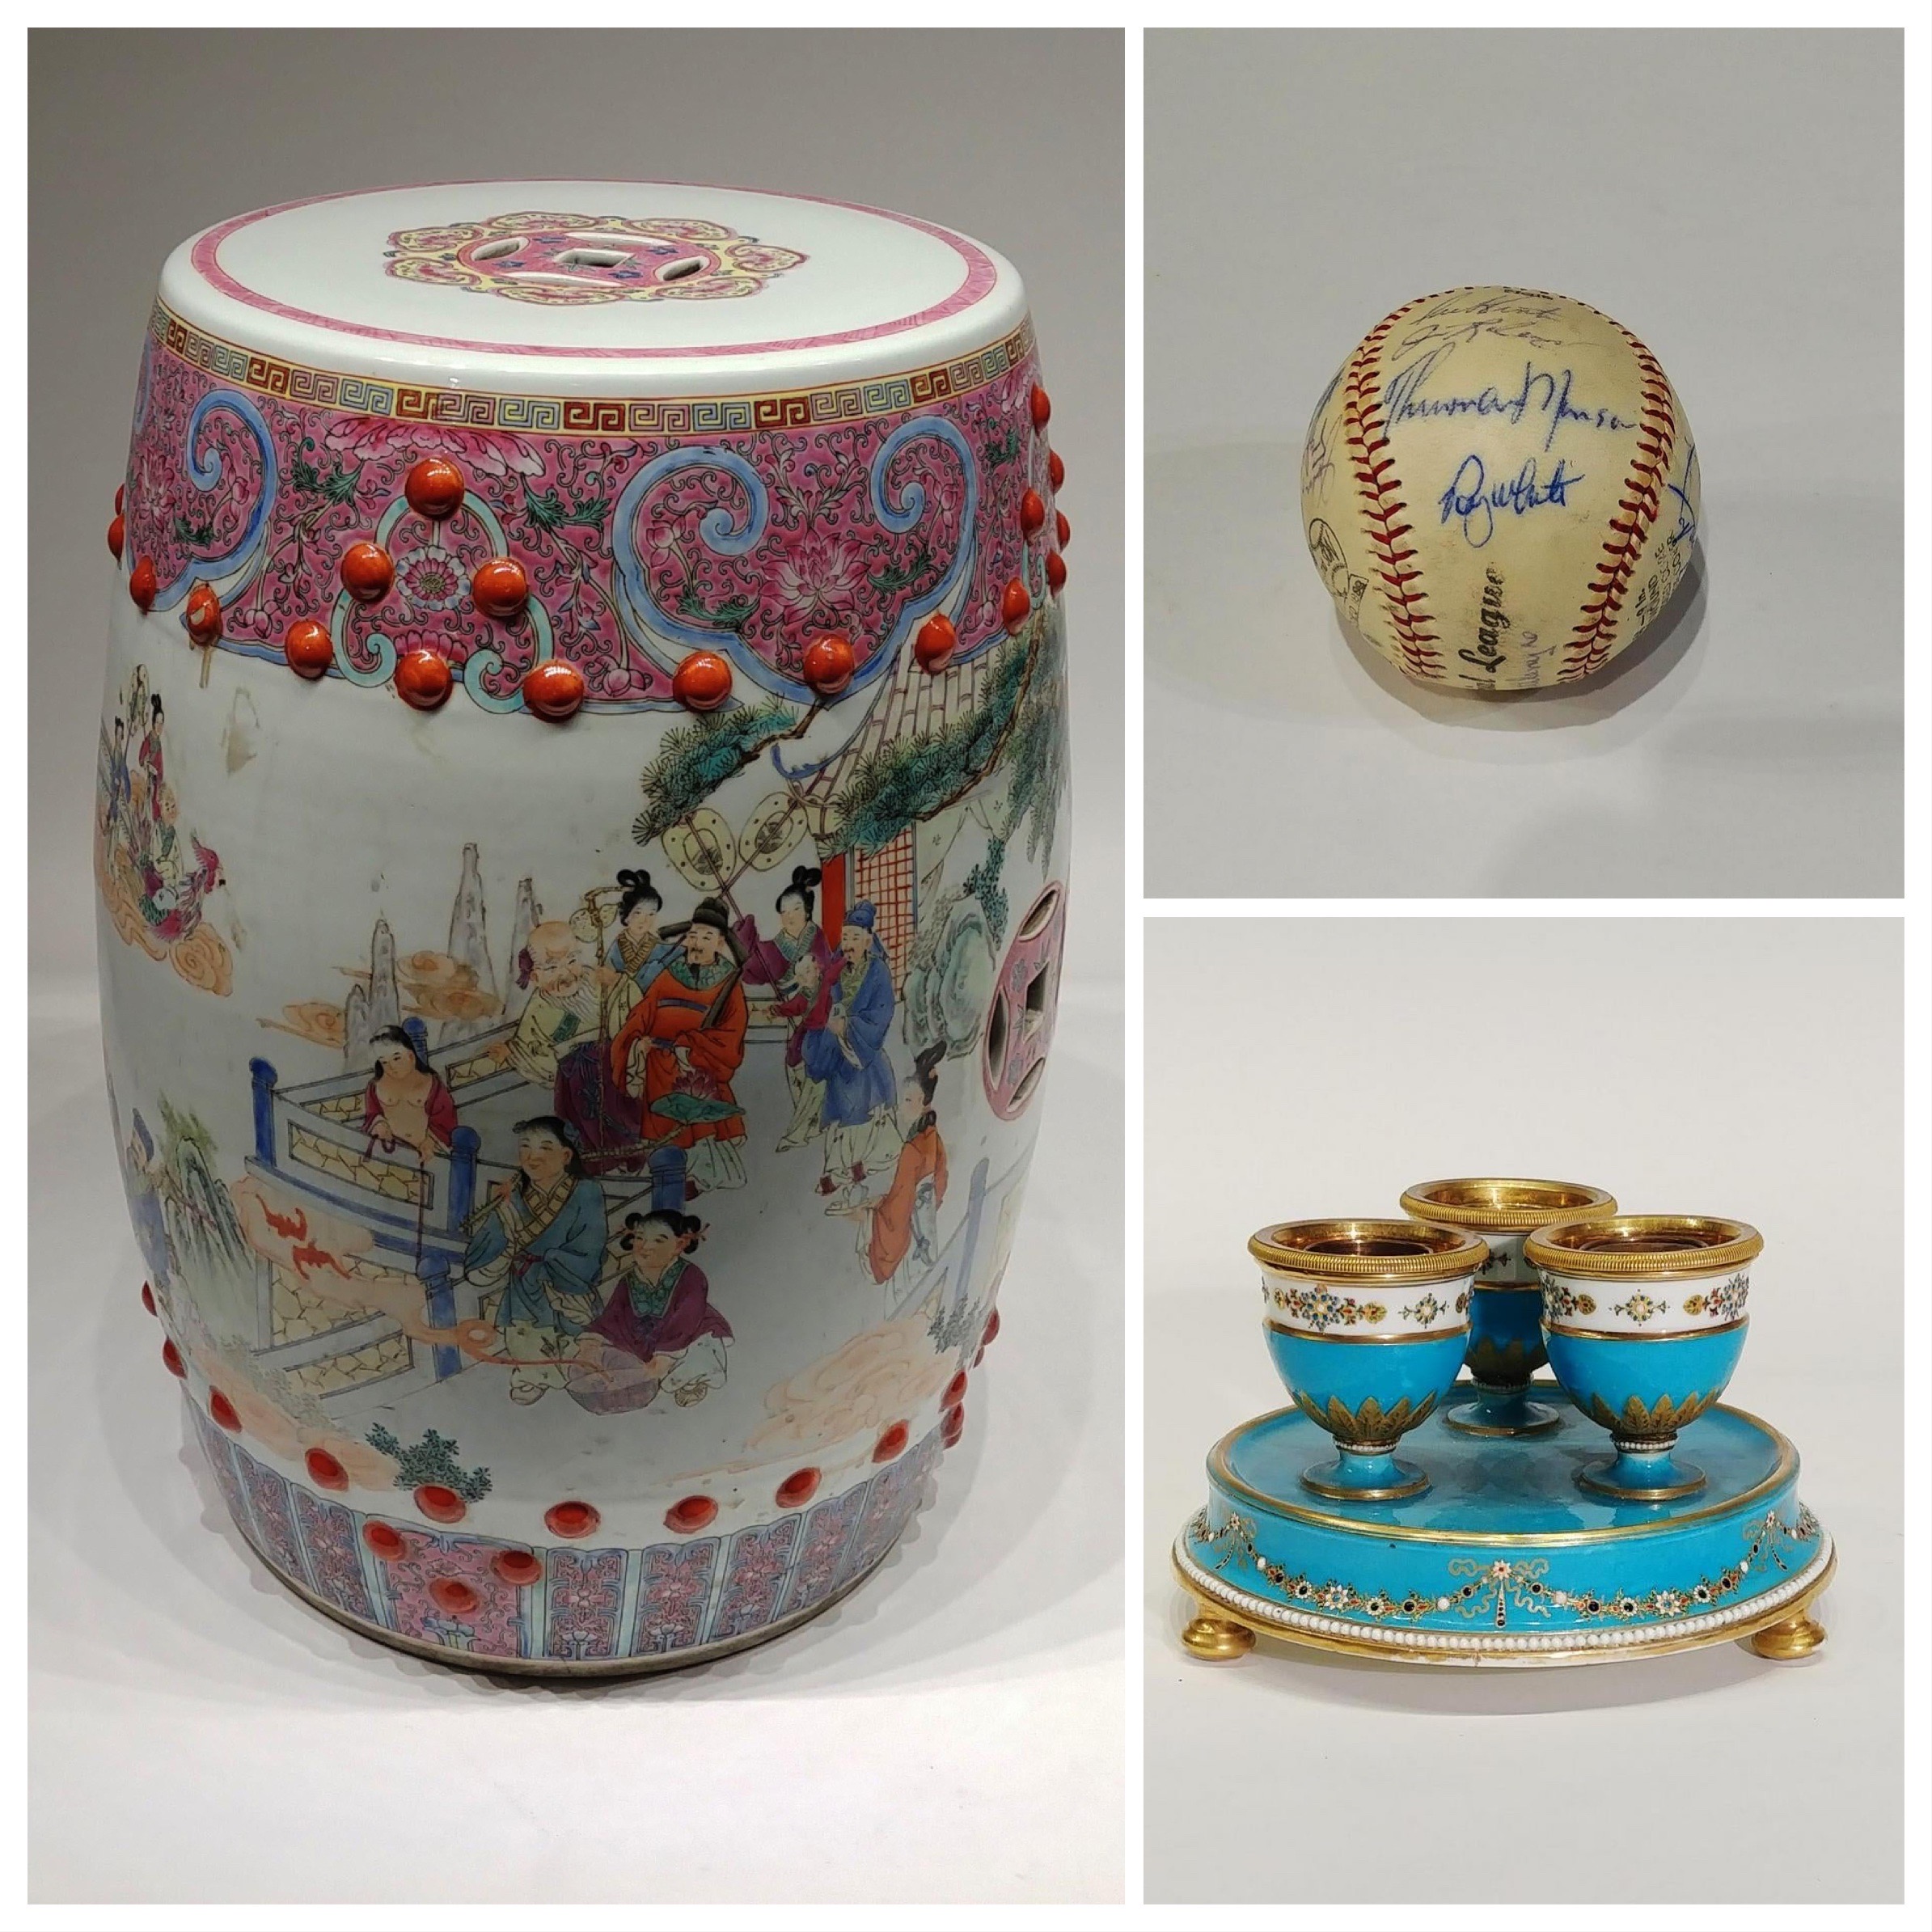 Fine Chinese Porcelain Garden Stool - with court scene and calligraphy, New York Yankees Team Signed Baseball 1972, Sevres Jeweled Porcelain Inkwell Set 